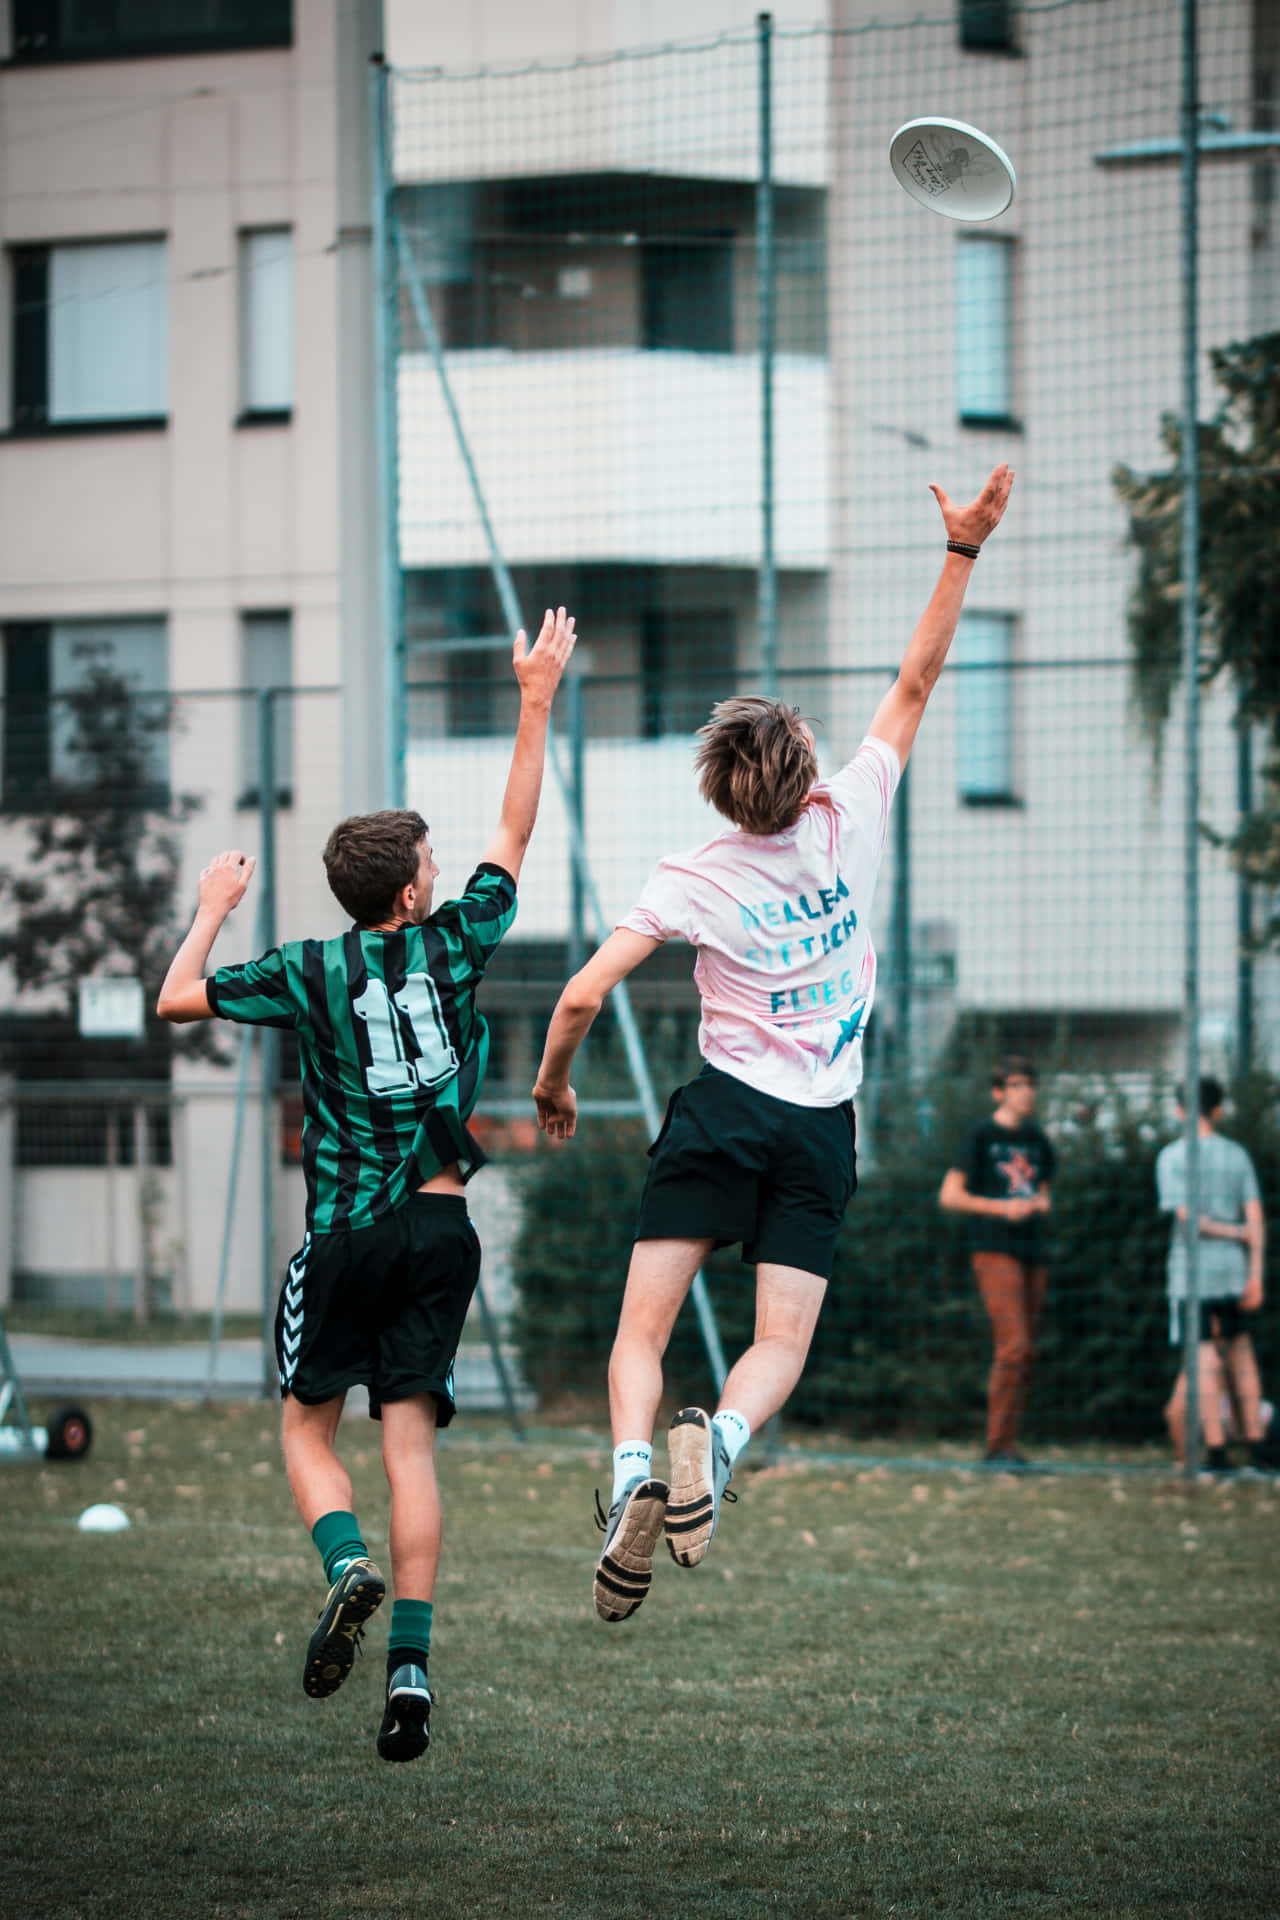 A Dynamic Display of Ultimate Frisbee